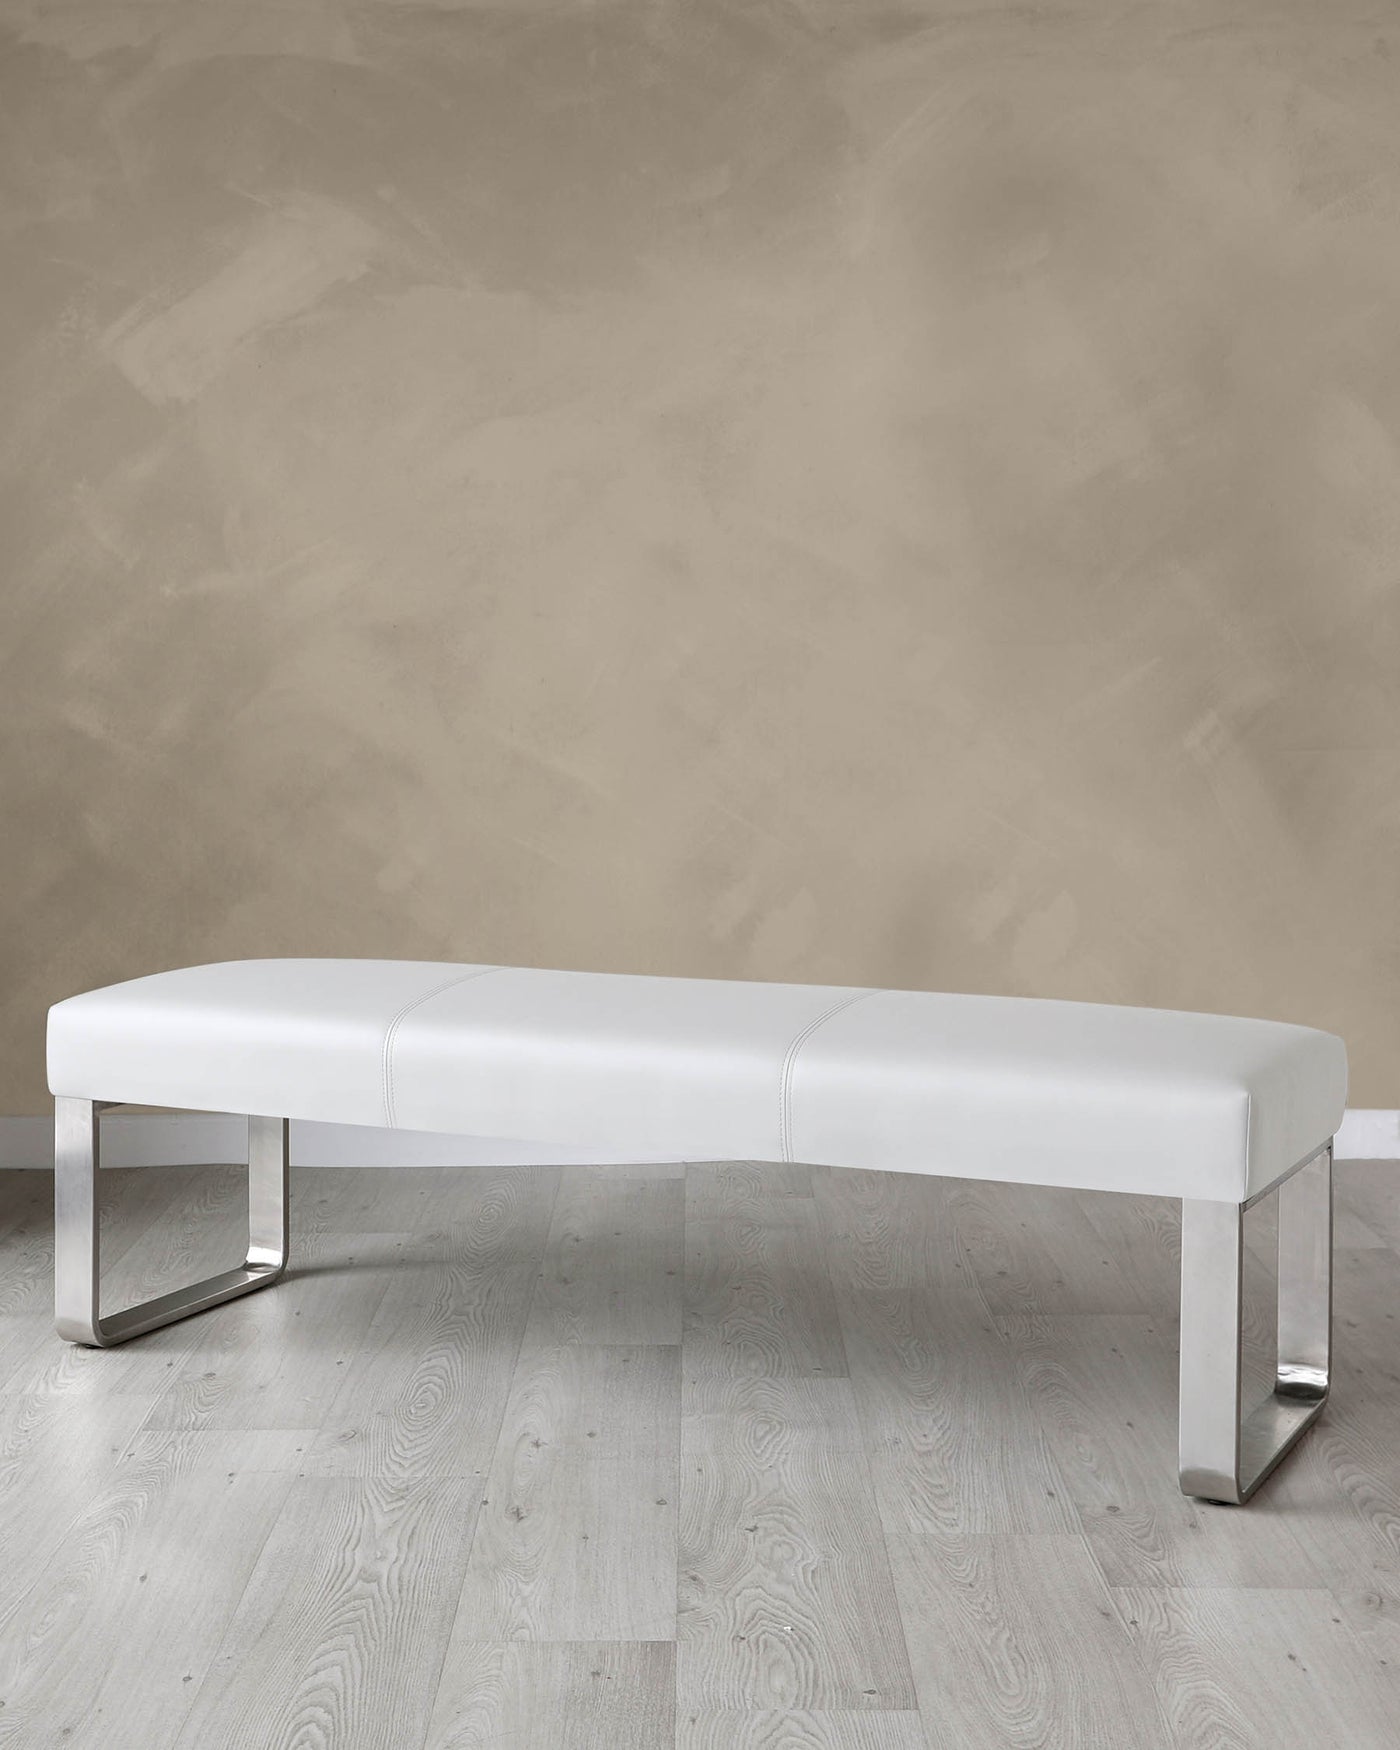 Modern white leather upholstered bench with sleek metallic legs set against a textured beige wall and light wooden flooring.